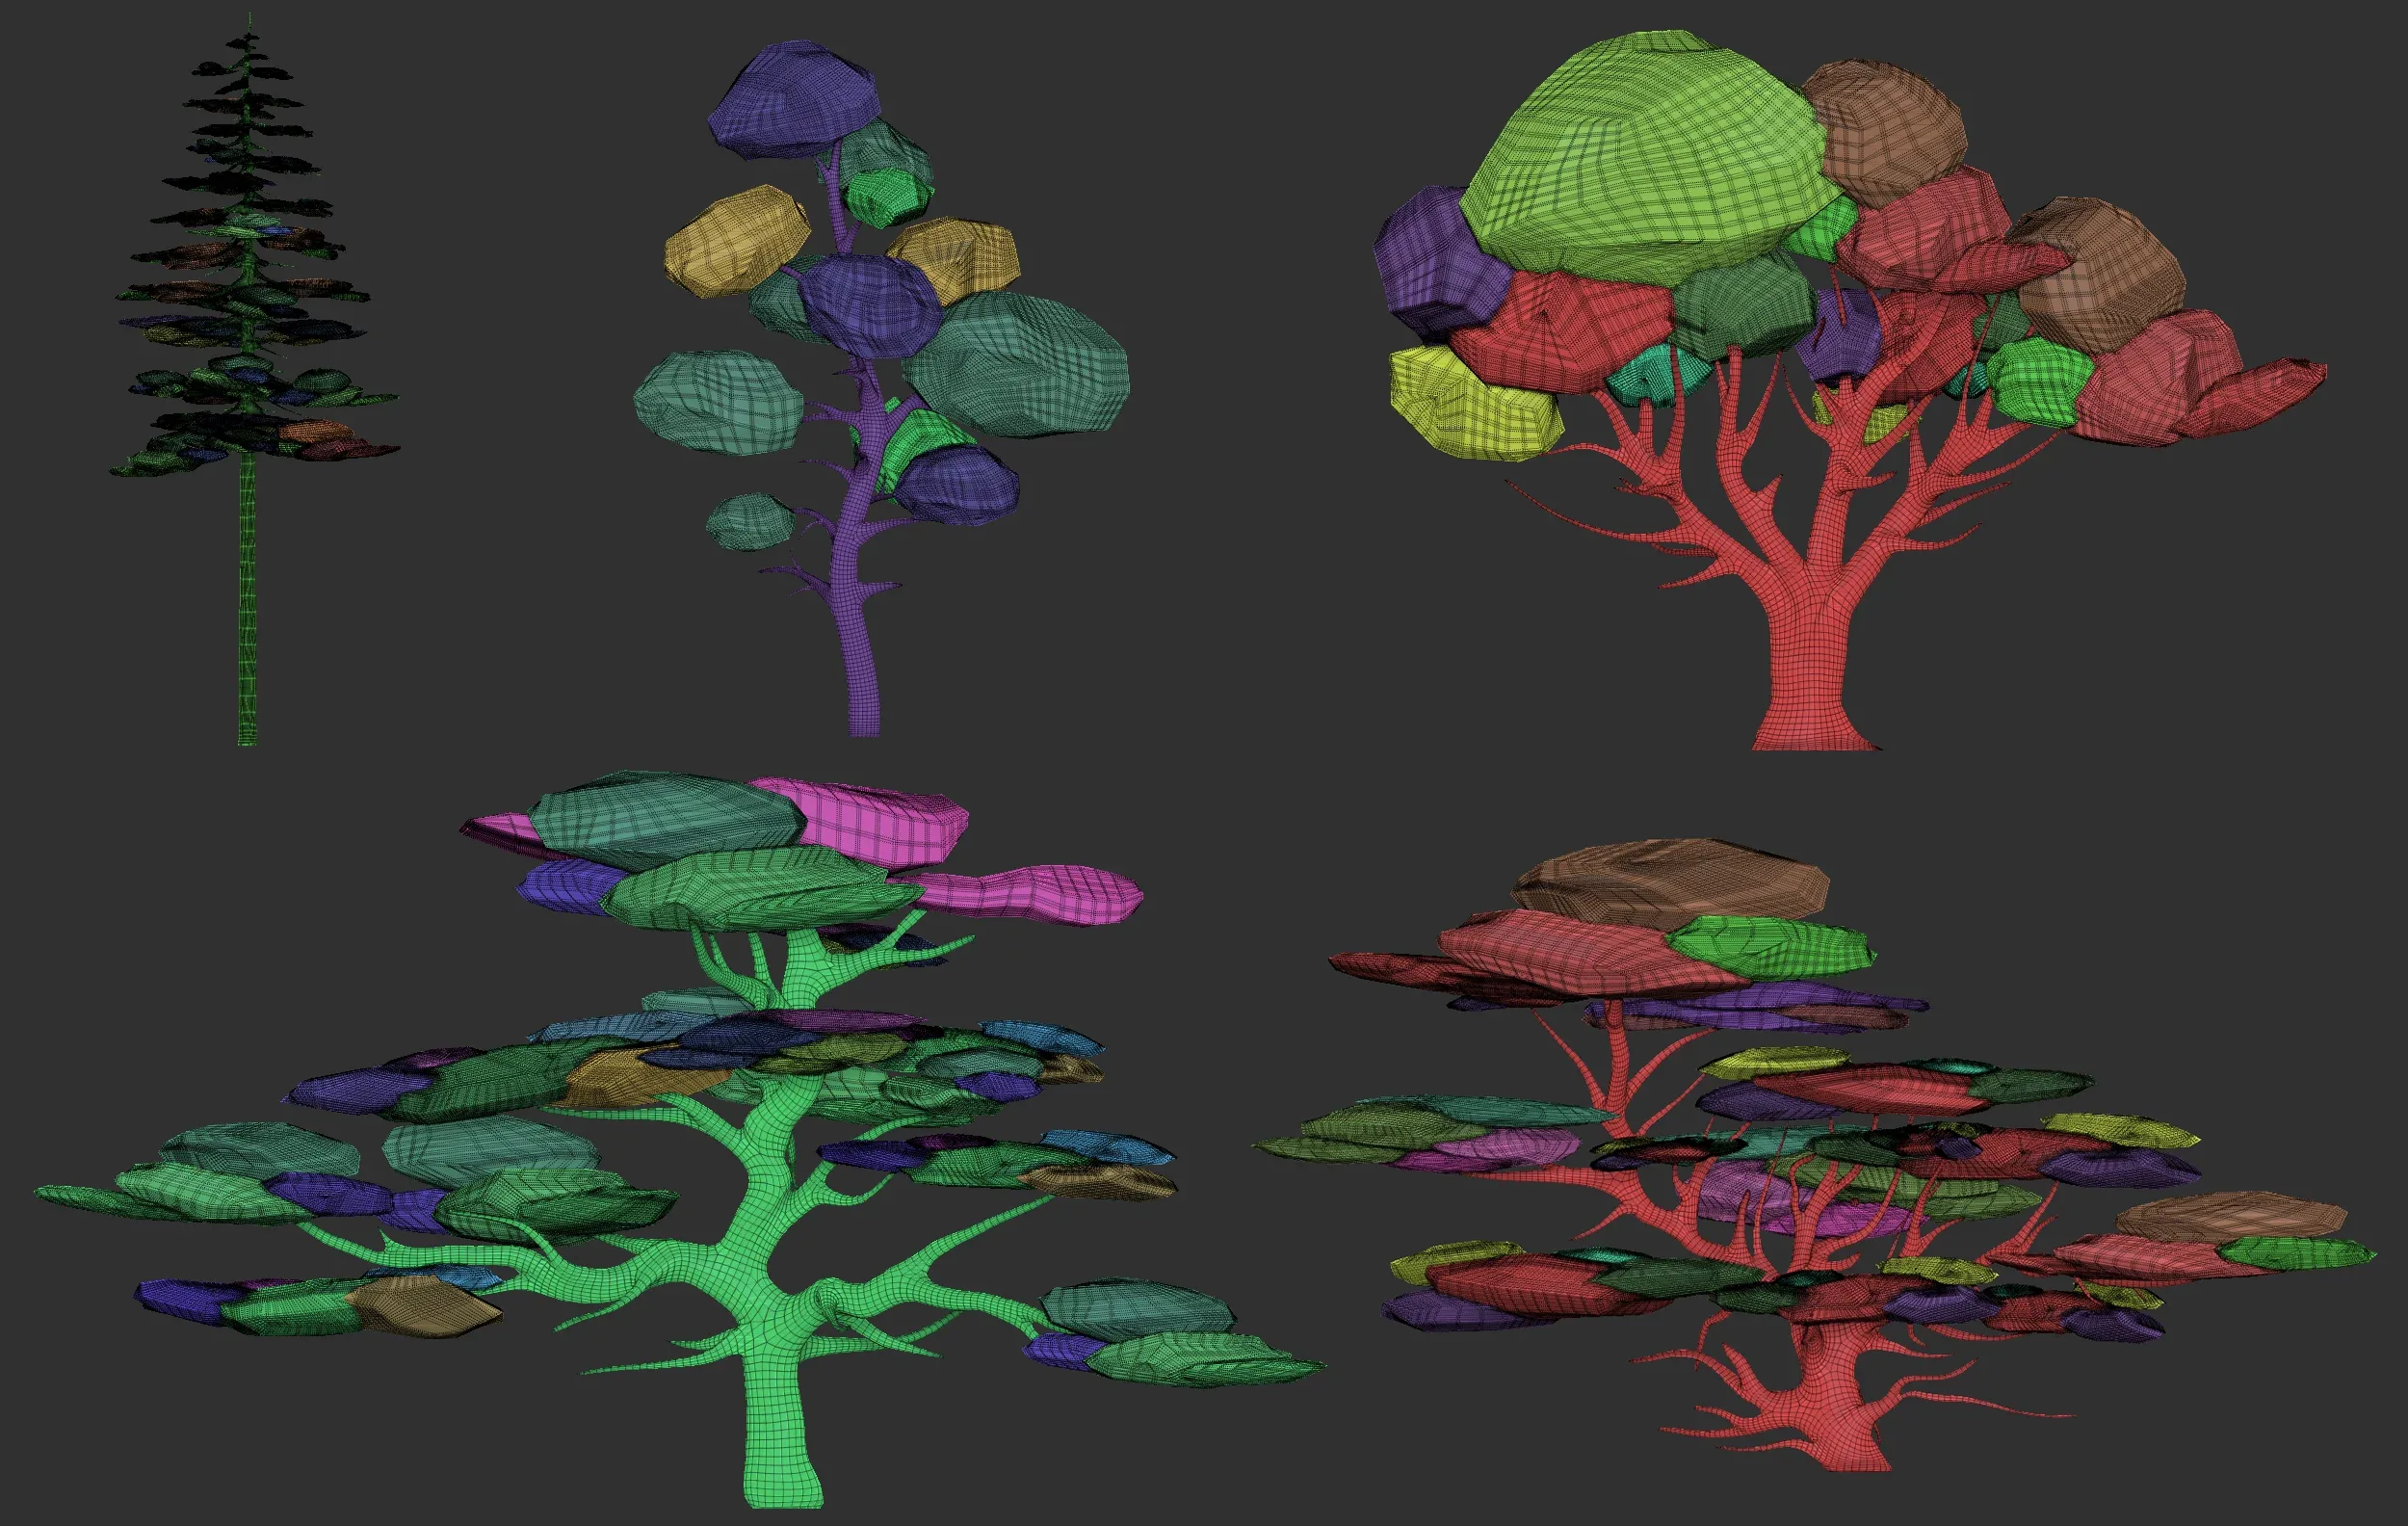 30 Low poly tree and bush base mesh shapes IMM brush set for Zbrush, FBX and OBJ files.